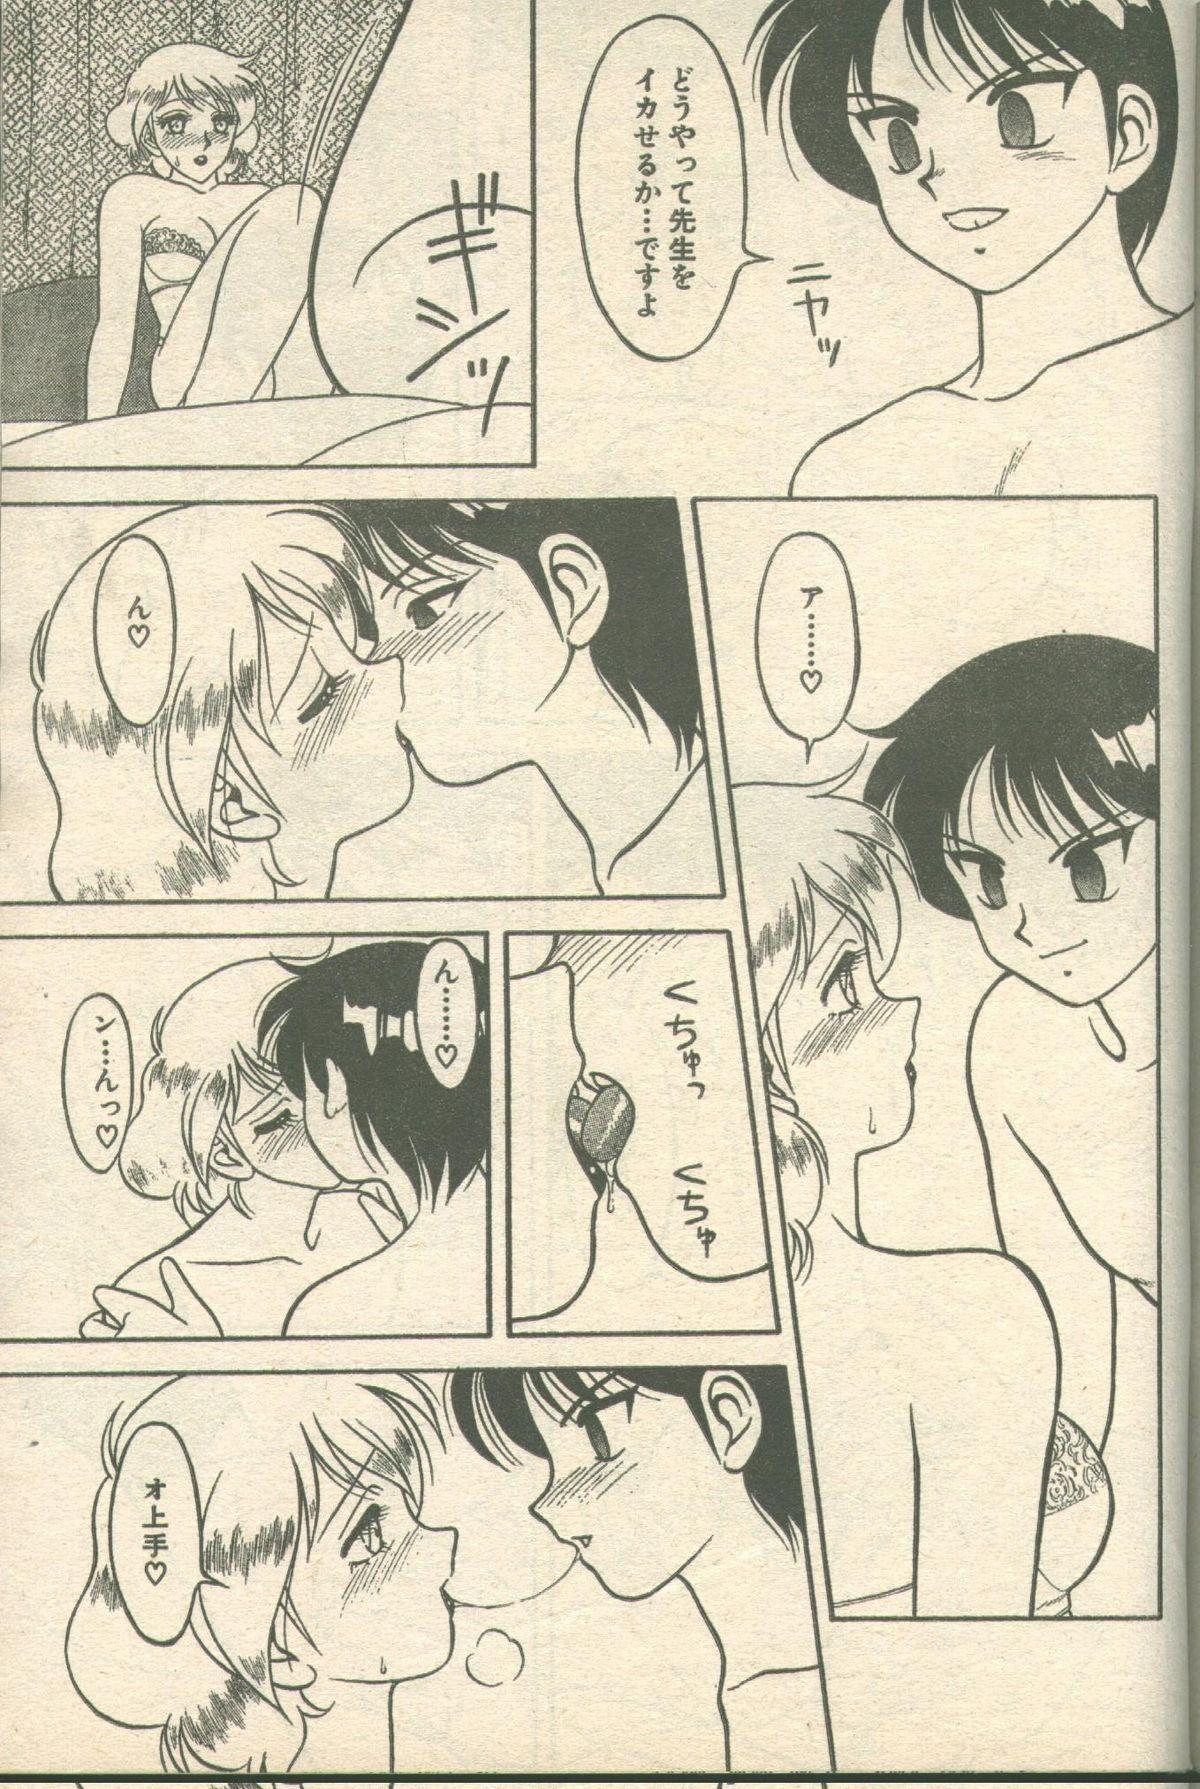 Best Blowjob Ever Candy Time 1992-11 4some - Page 10